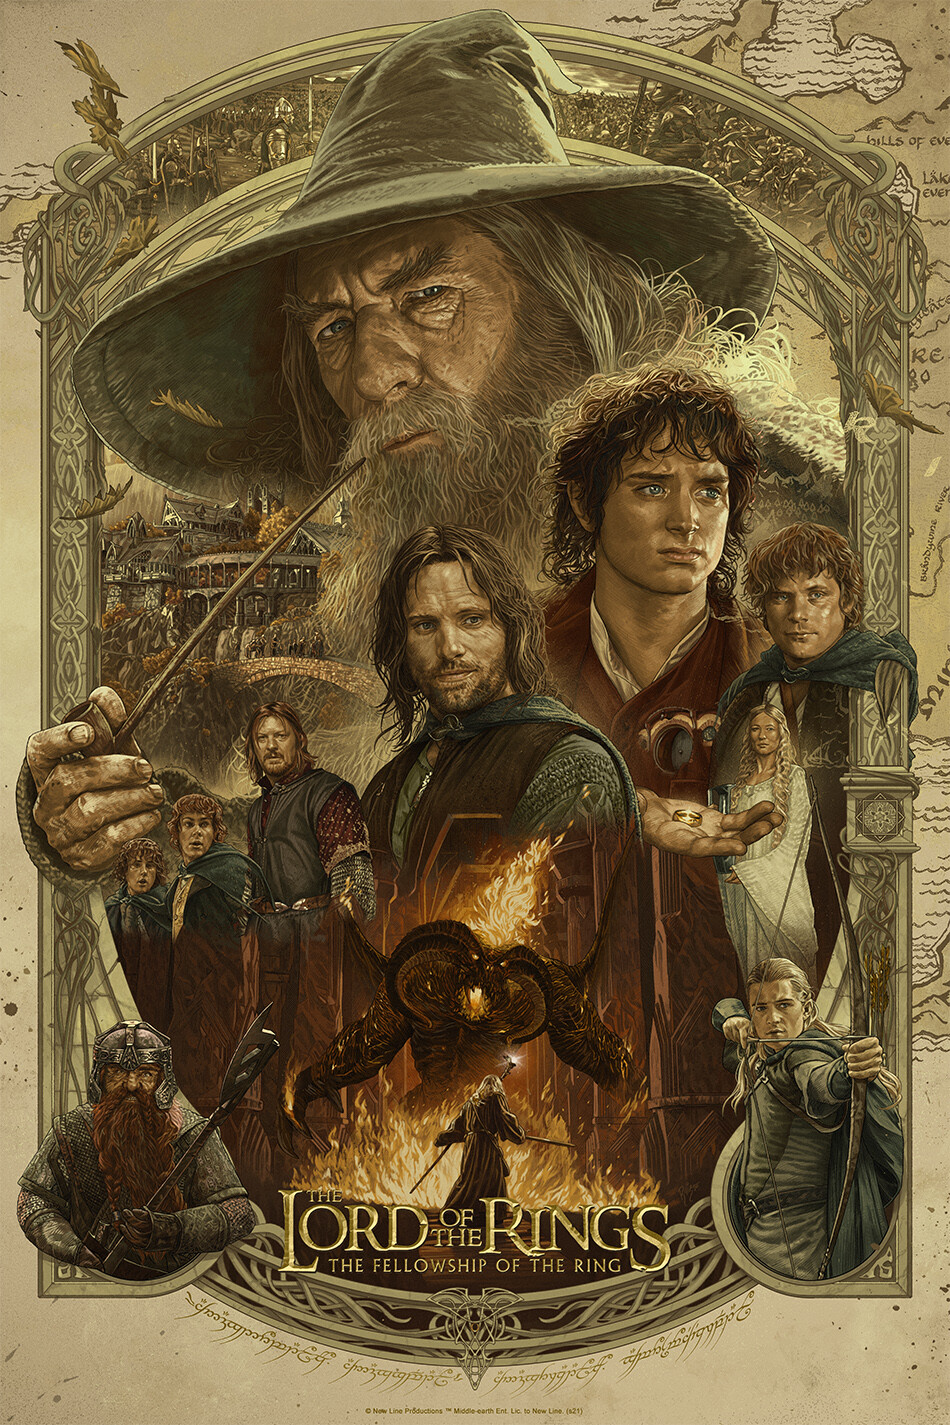 The Lord of the Rings: The Fellowship of the Ring Art by RUIZ BURGOS